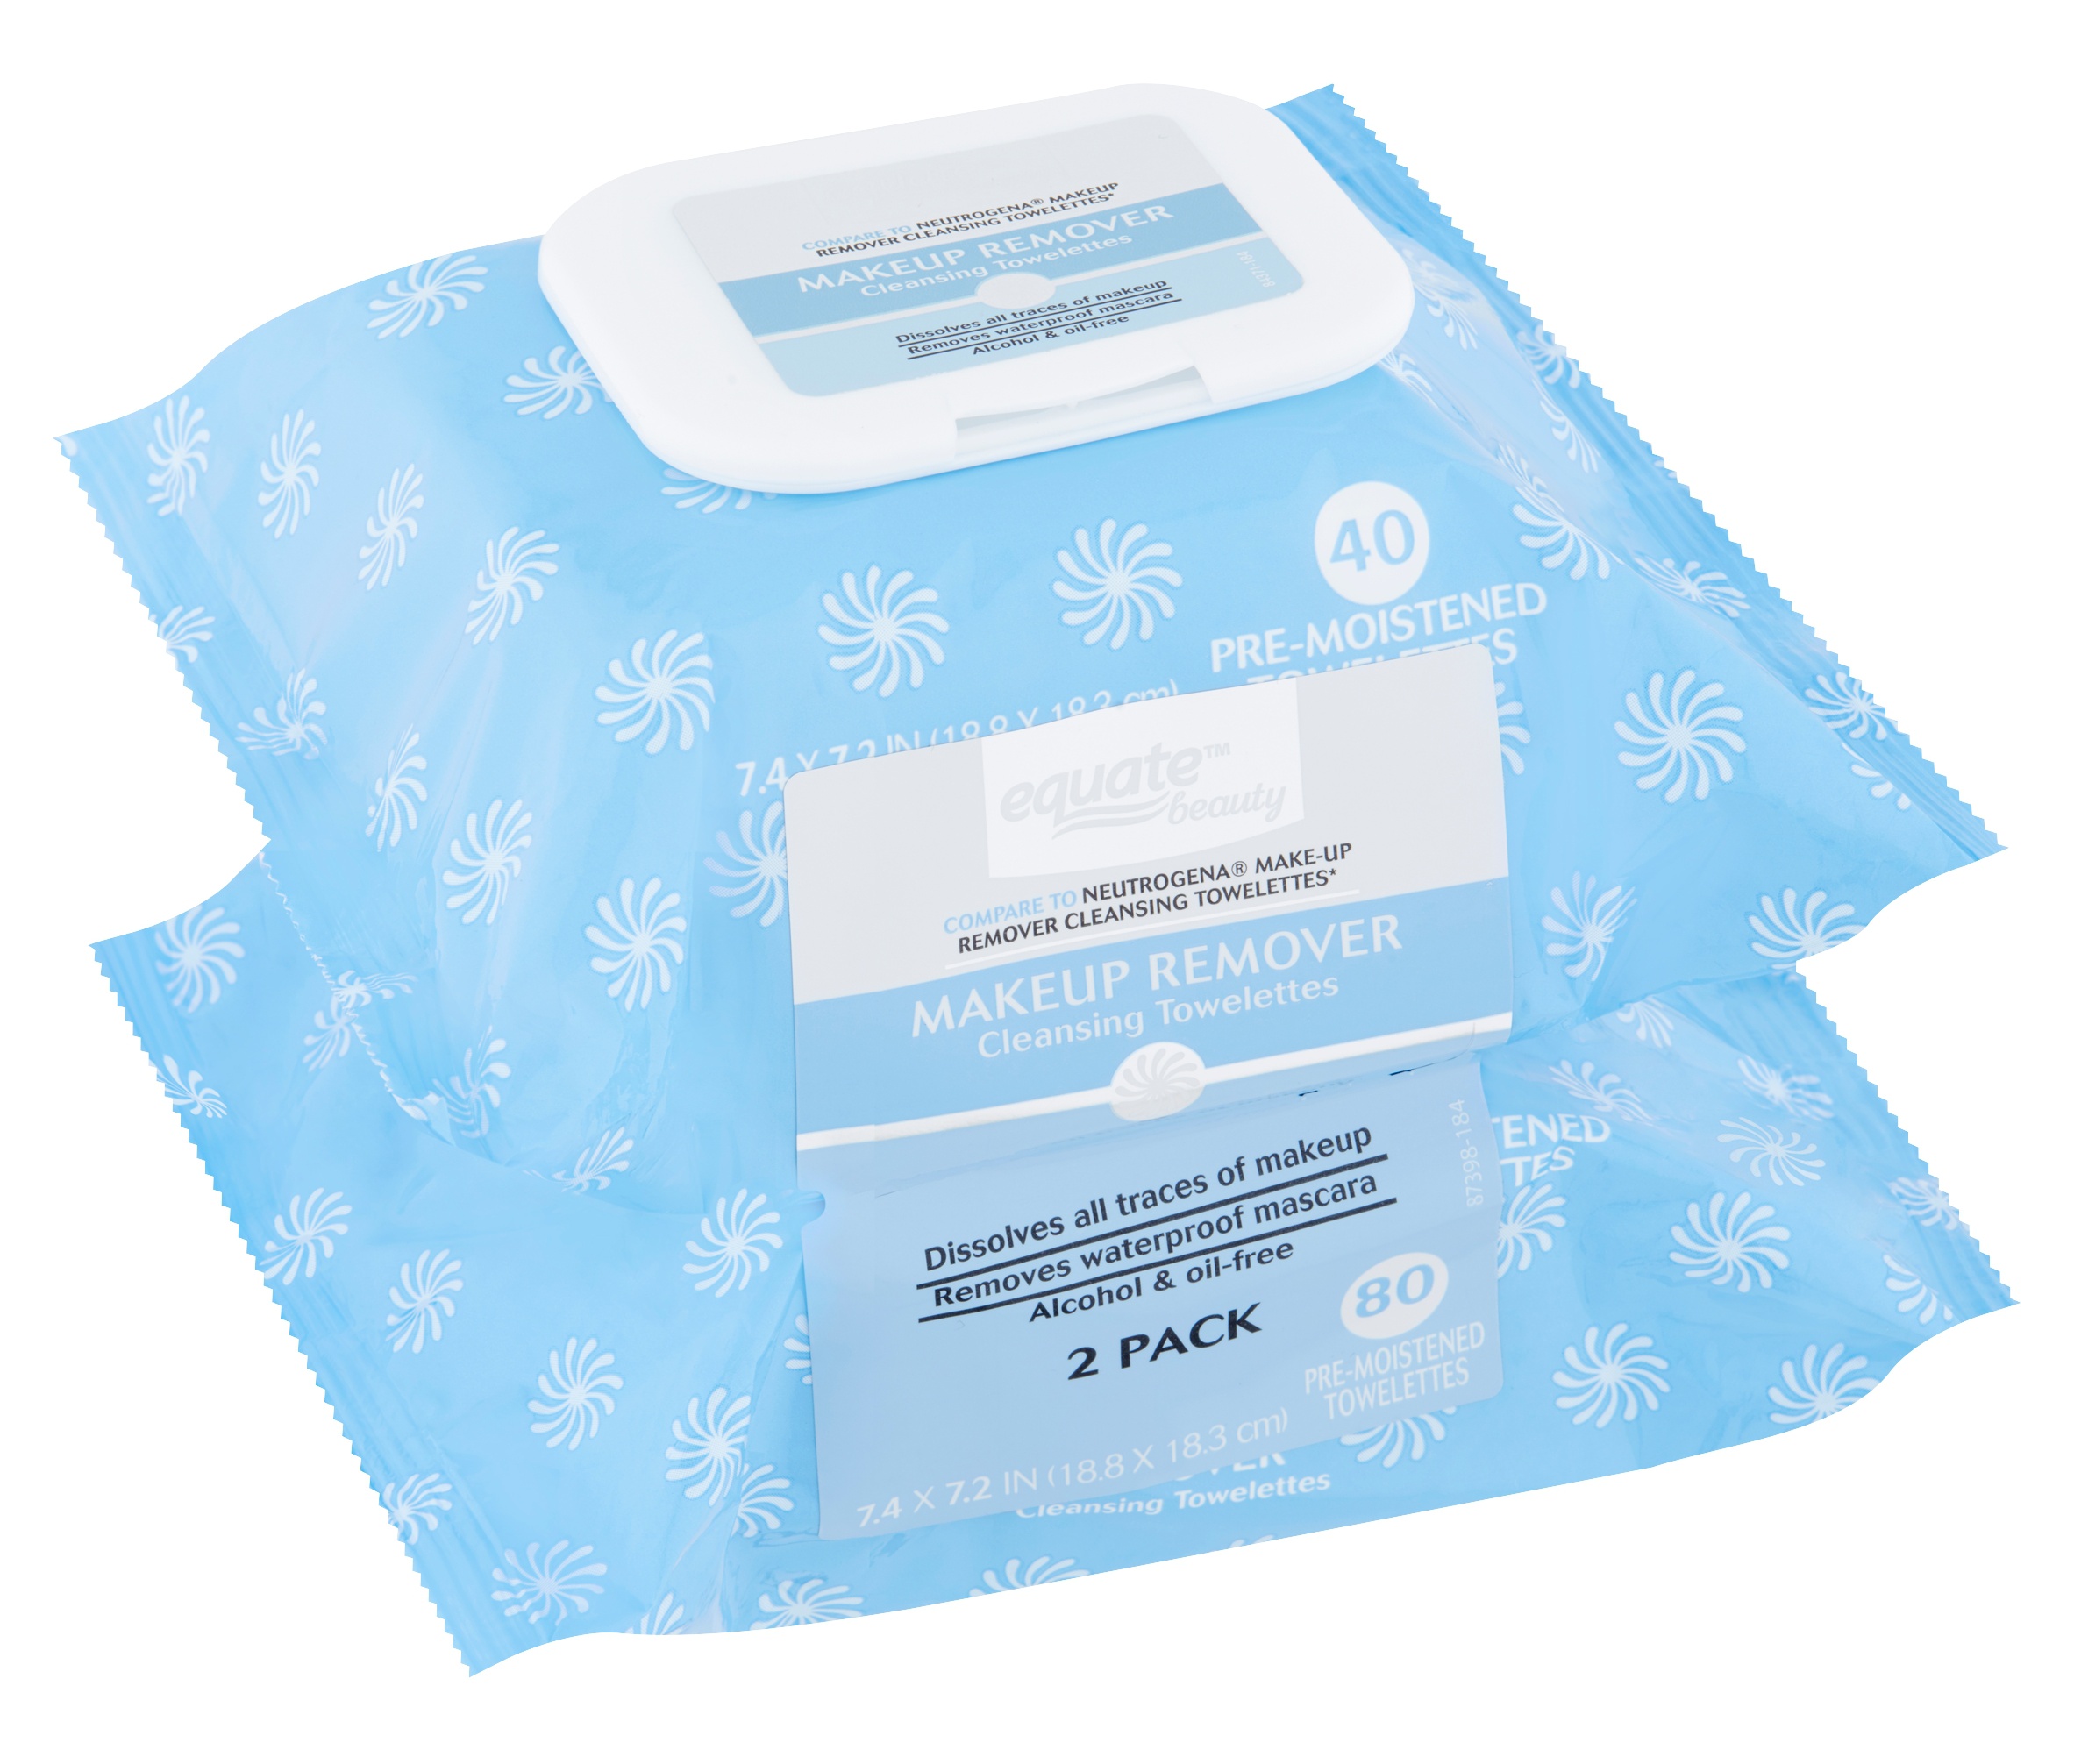 Equate Beauty Makeup Remover Wipes